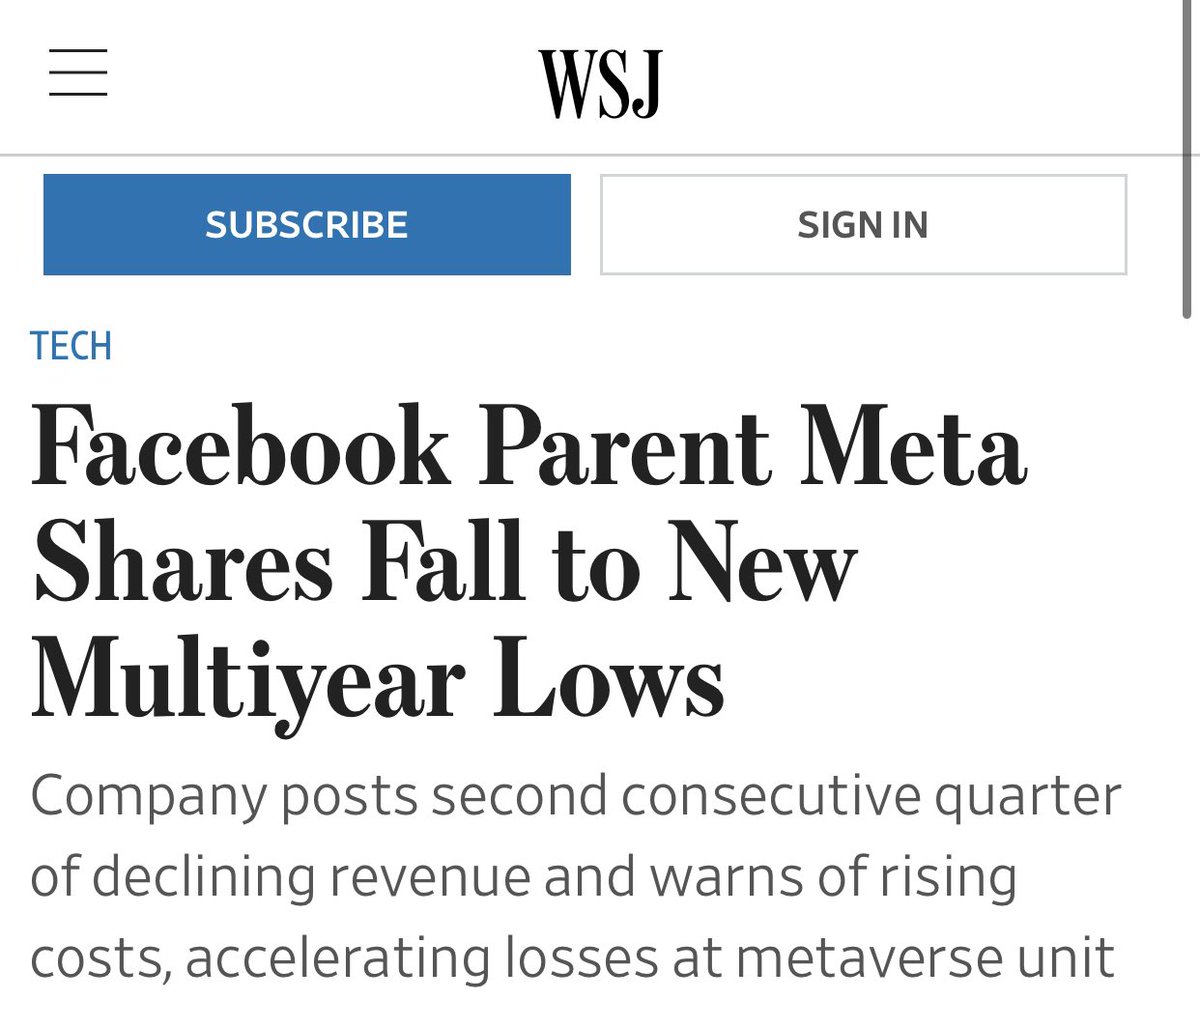 Zuck famously said “If we don't create the thing that kills Facebook, someone else will.” So his team created Metaverse to the kill the company. Mission accomplished 😎